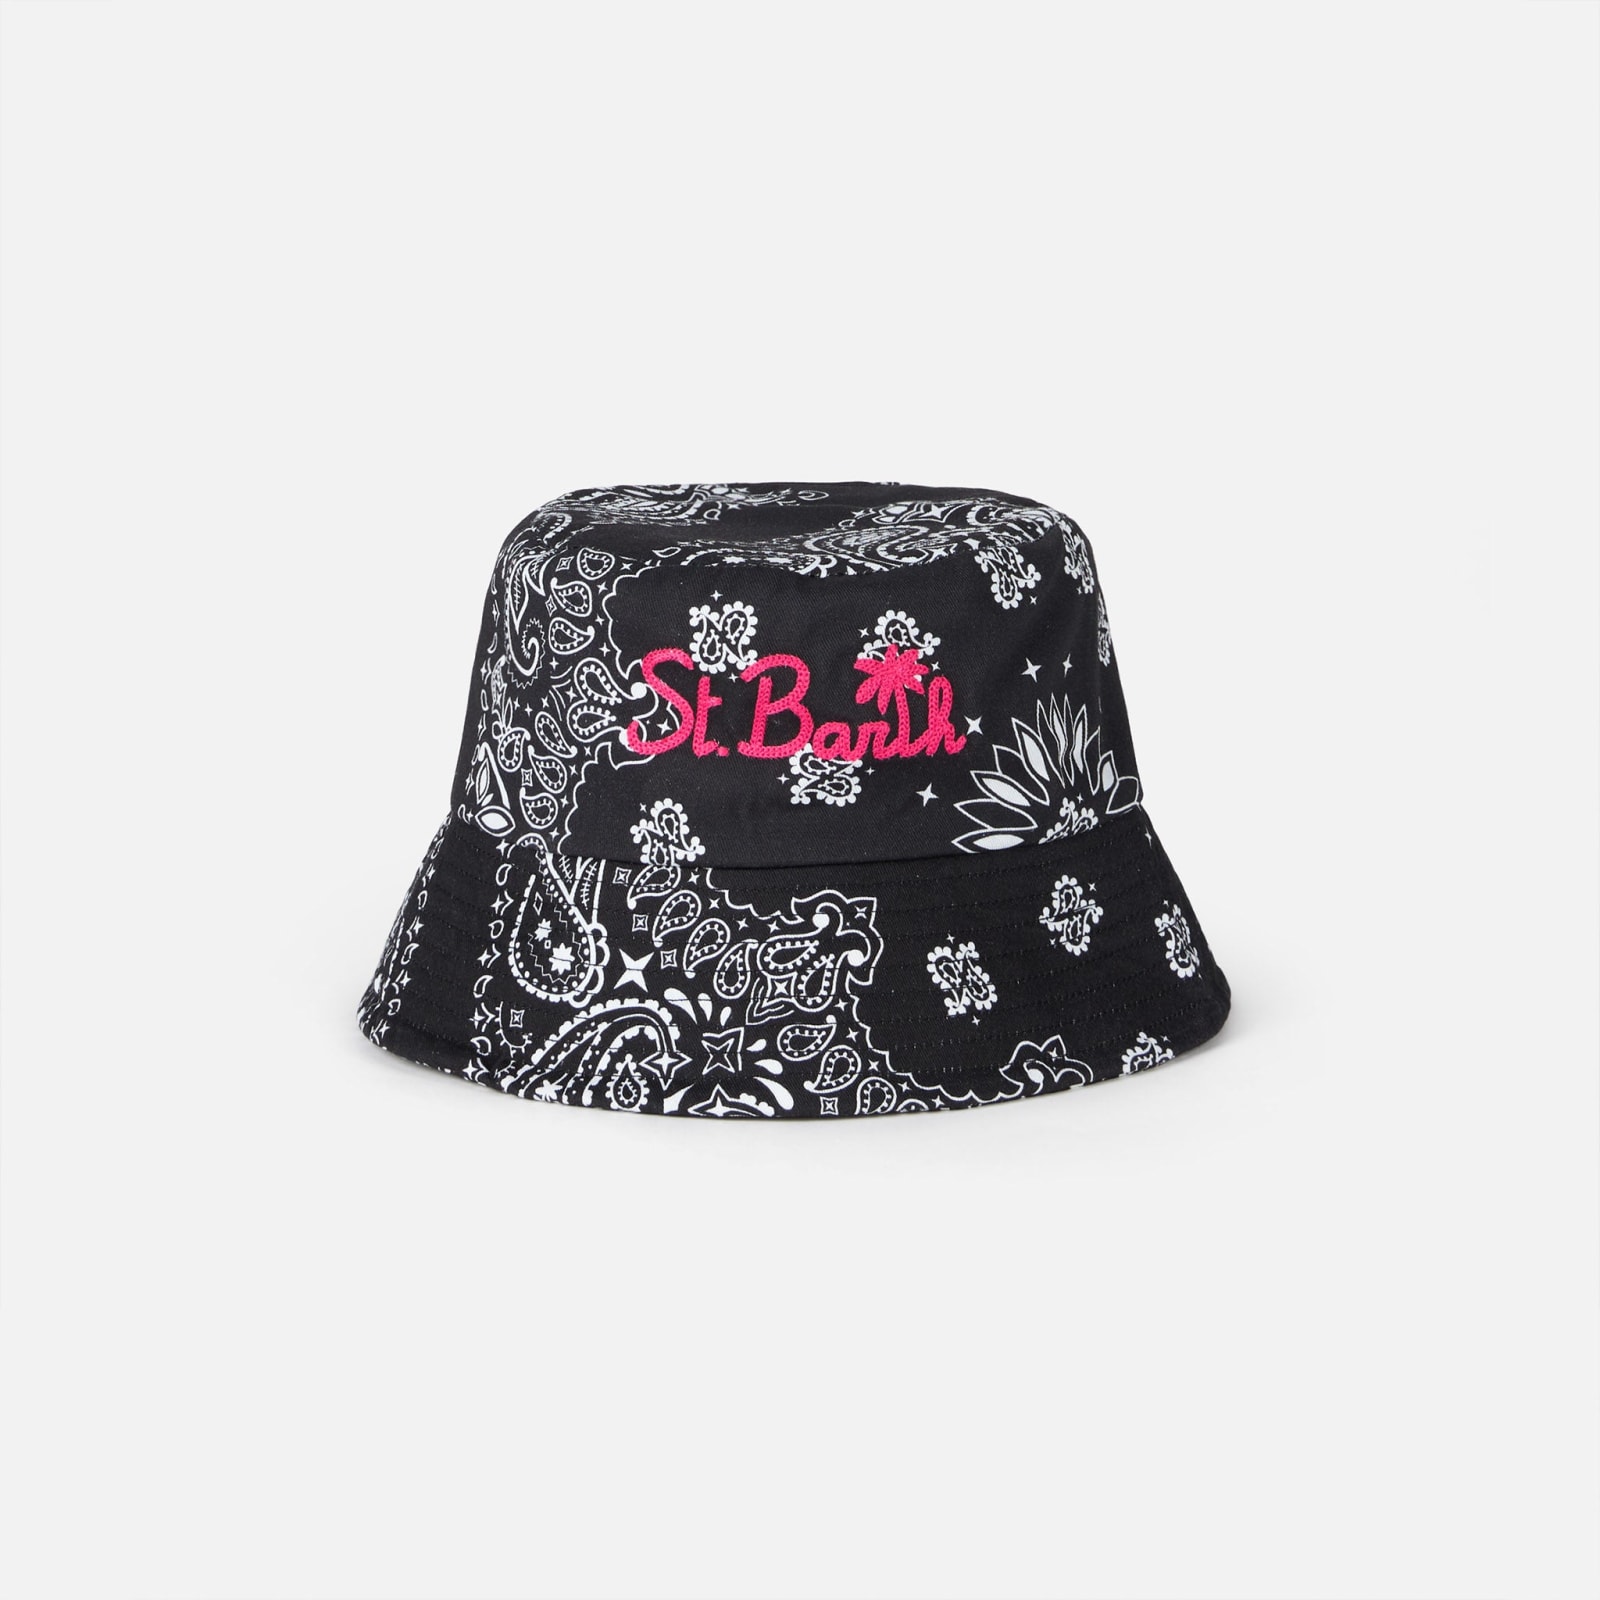 Mc2 Saint Barth Cotton Bucket Hat With Front Embroidery And Bandanna Pattern In Black